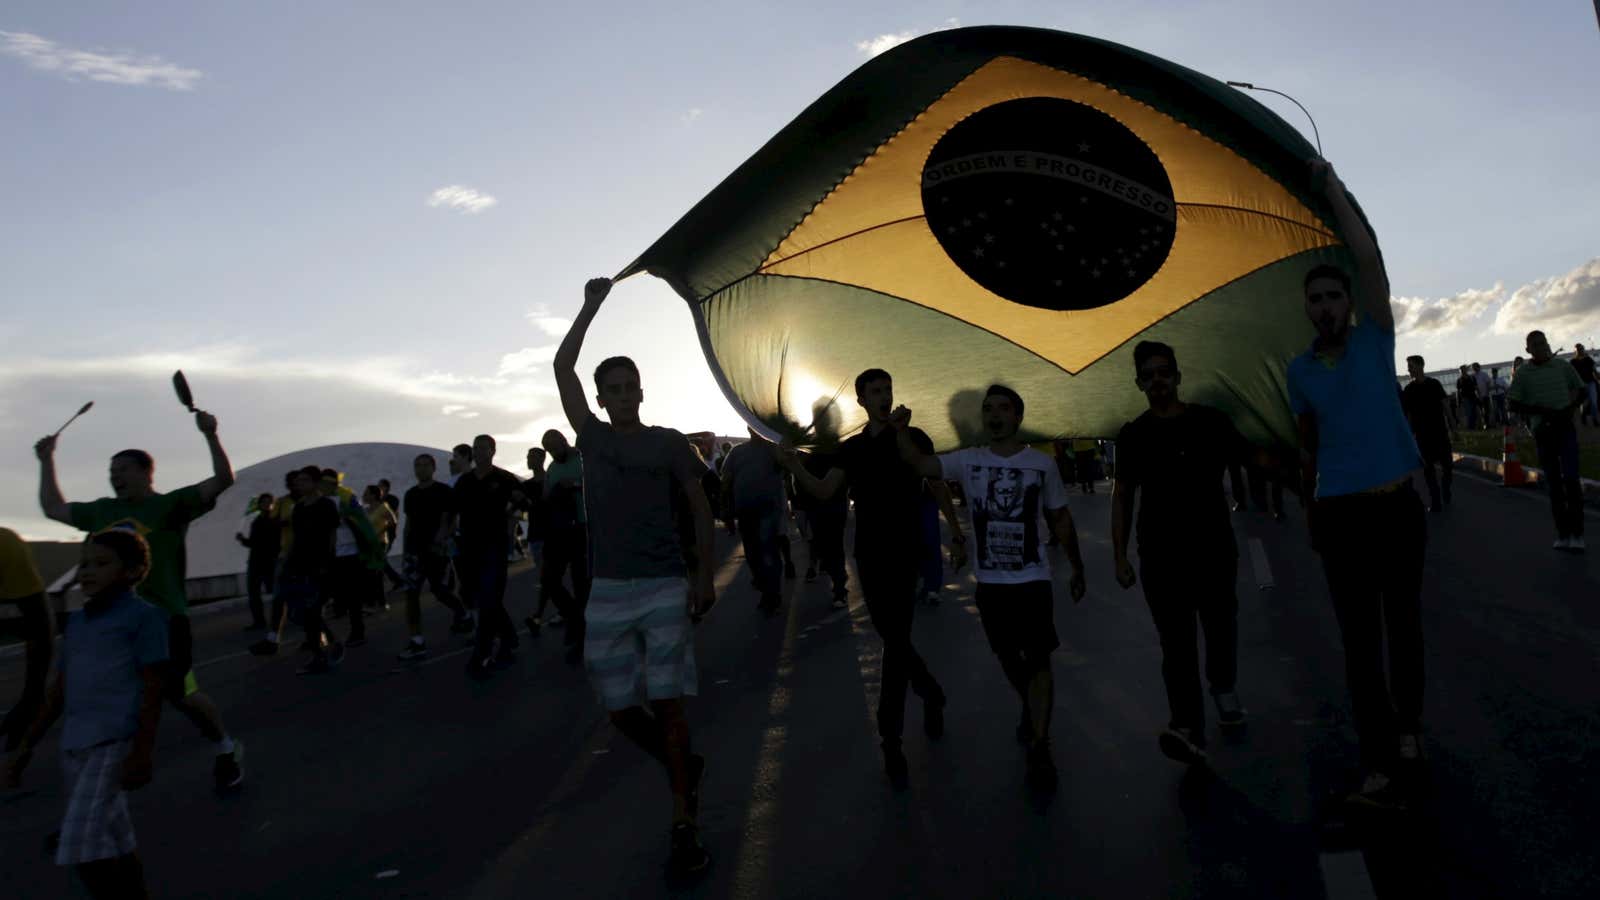 The sun has set on a period of prosperity in Brazil.